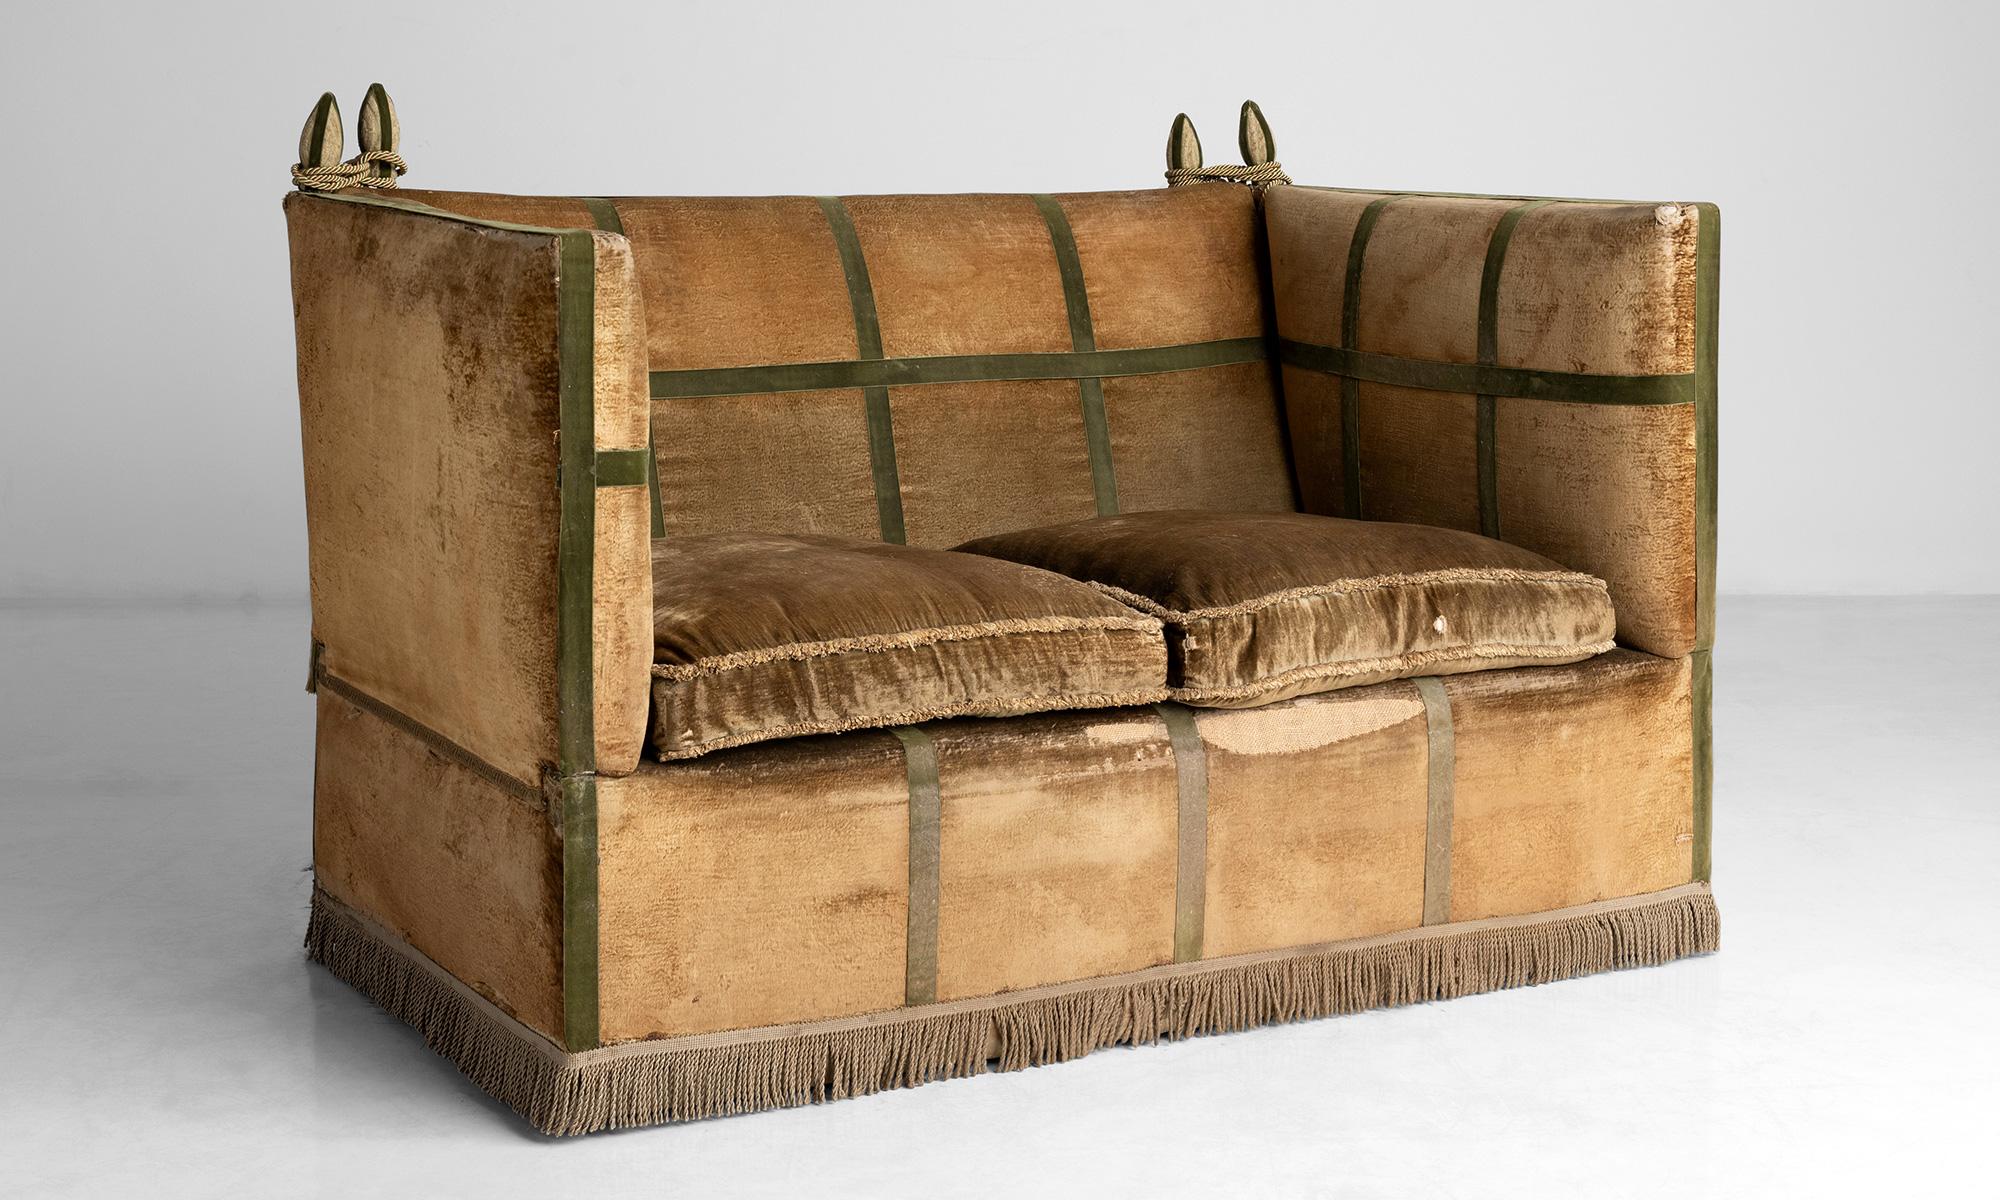 Edwardian Knole sofa.

England circa 1910.

In original velvet upholstery, with adjustable sides for reclining.

Measures: 61”L x 39.25” D x 42.5” H x 19”seat.